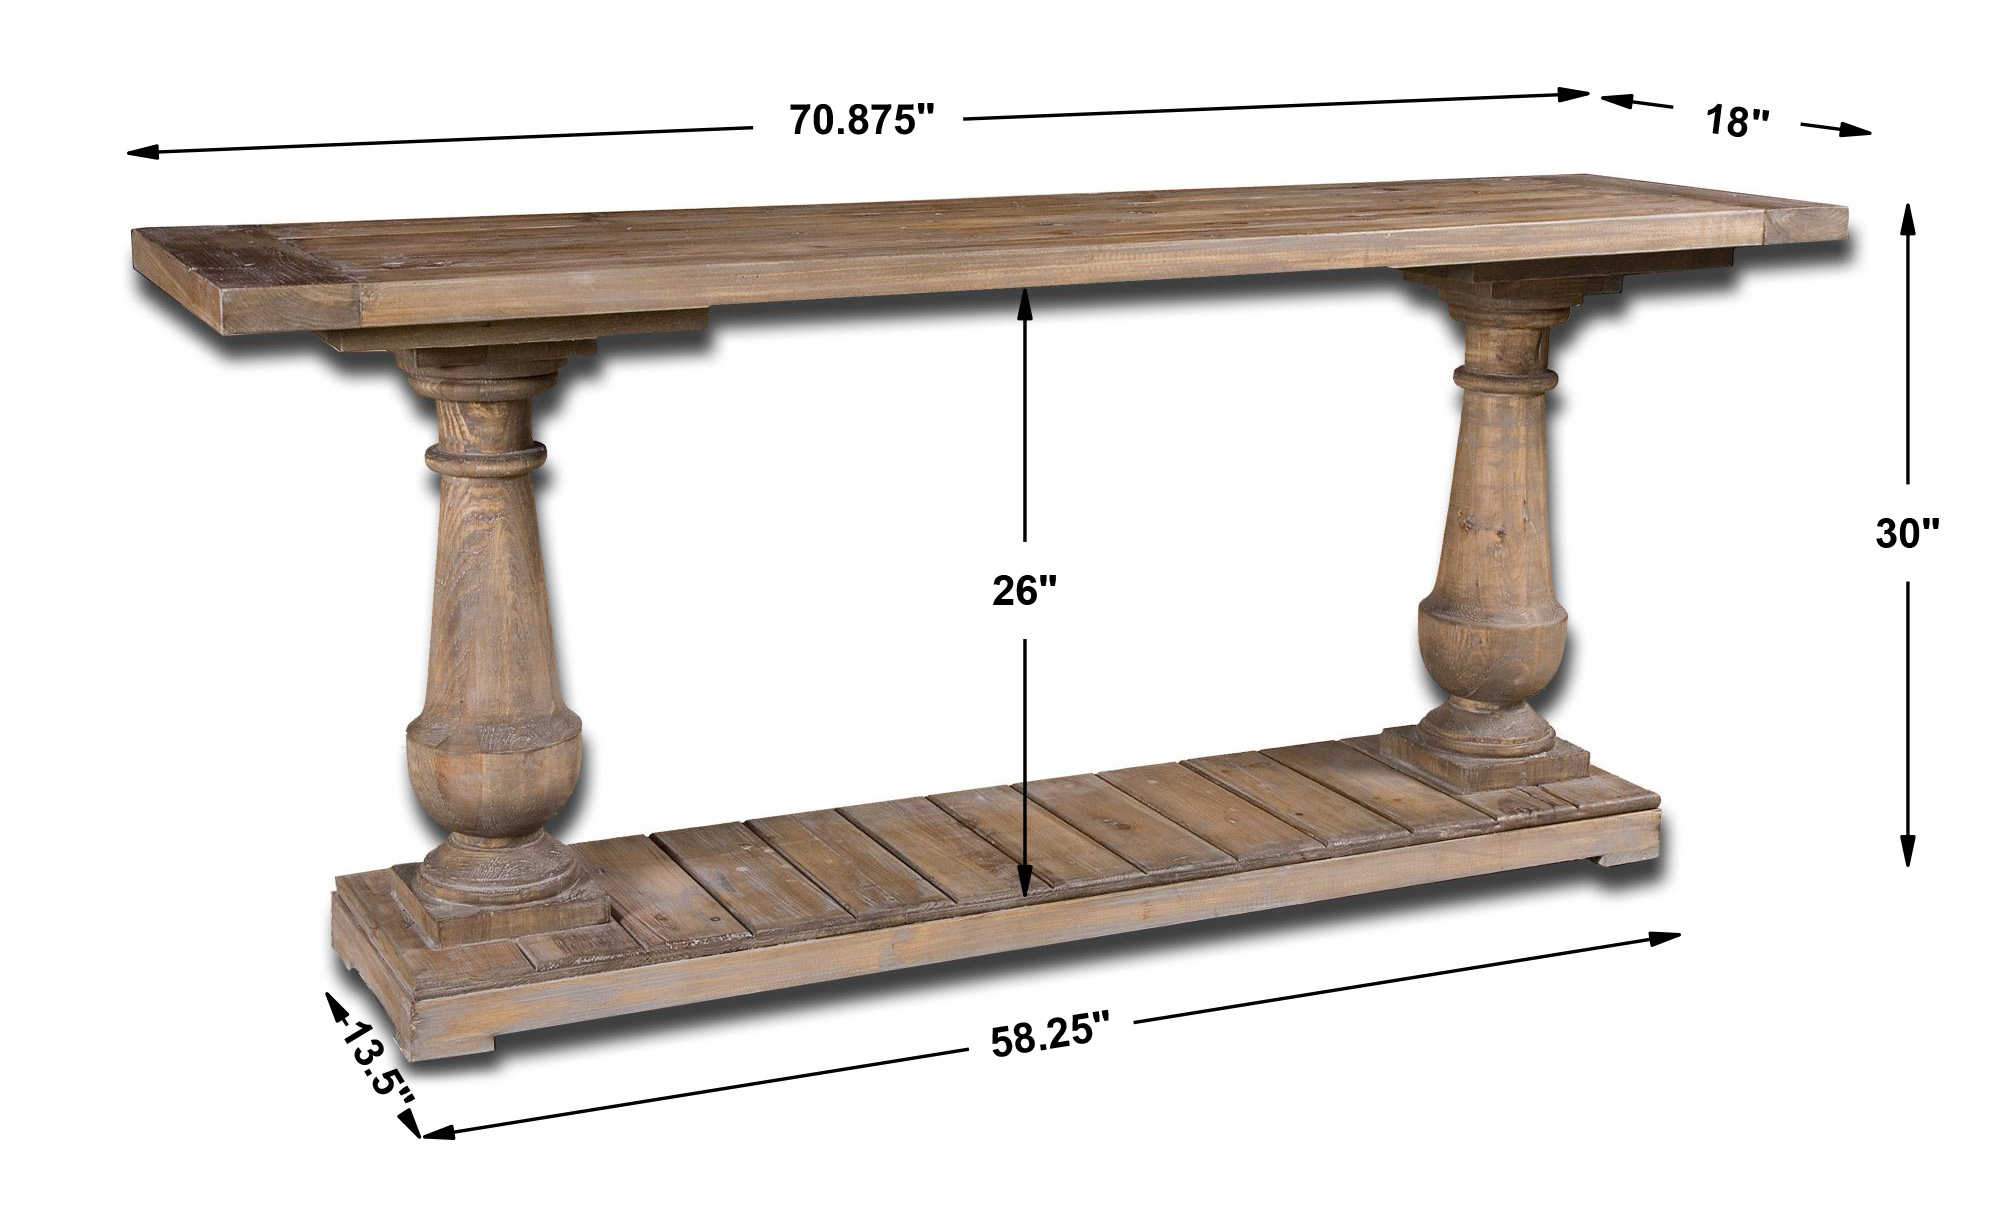 Uttermost Home Motor Freight - Rate to be Quoted Uttermost Stratford Console - Shipping December